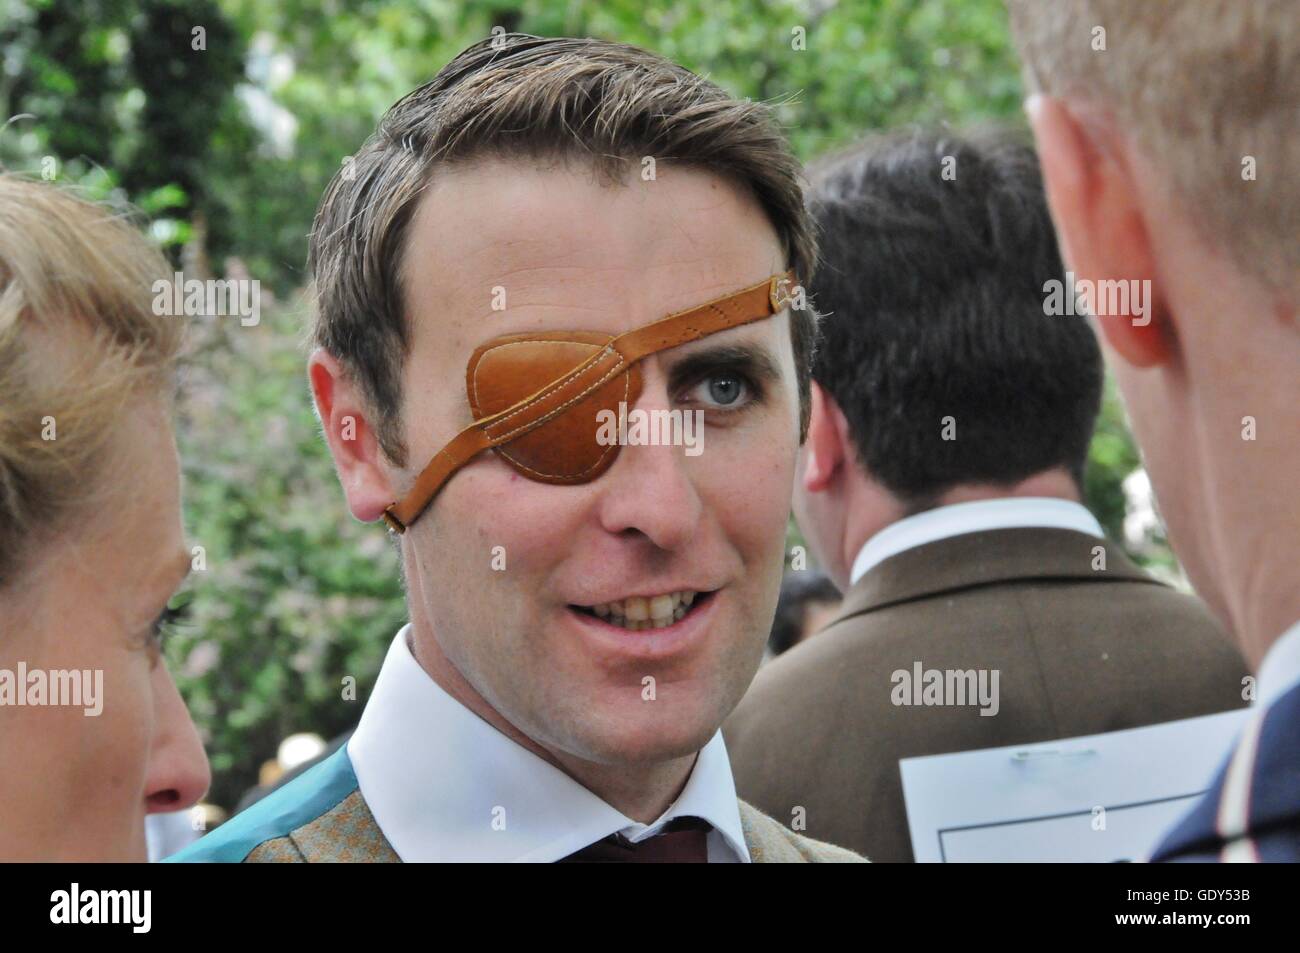 A man with an eye patch, talking to his friends. Stock Photo